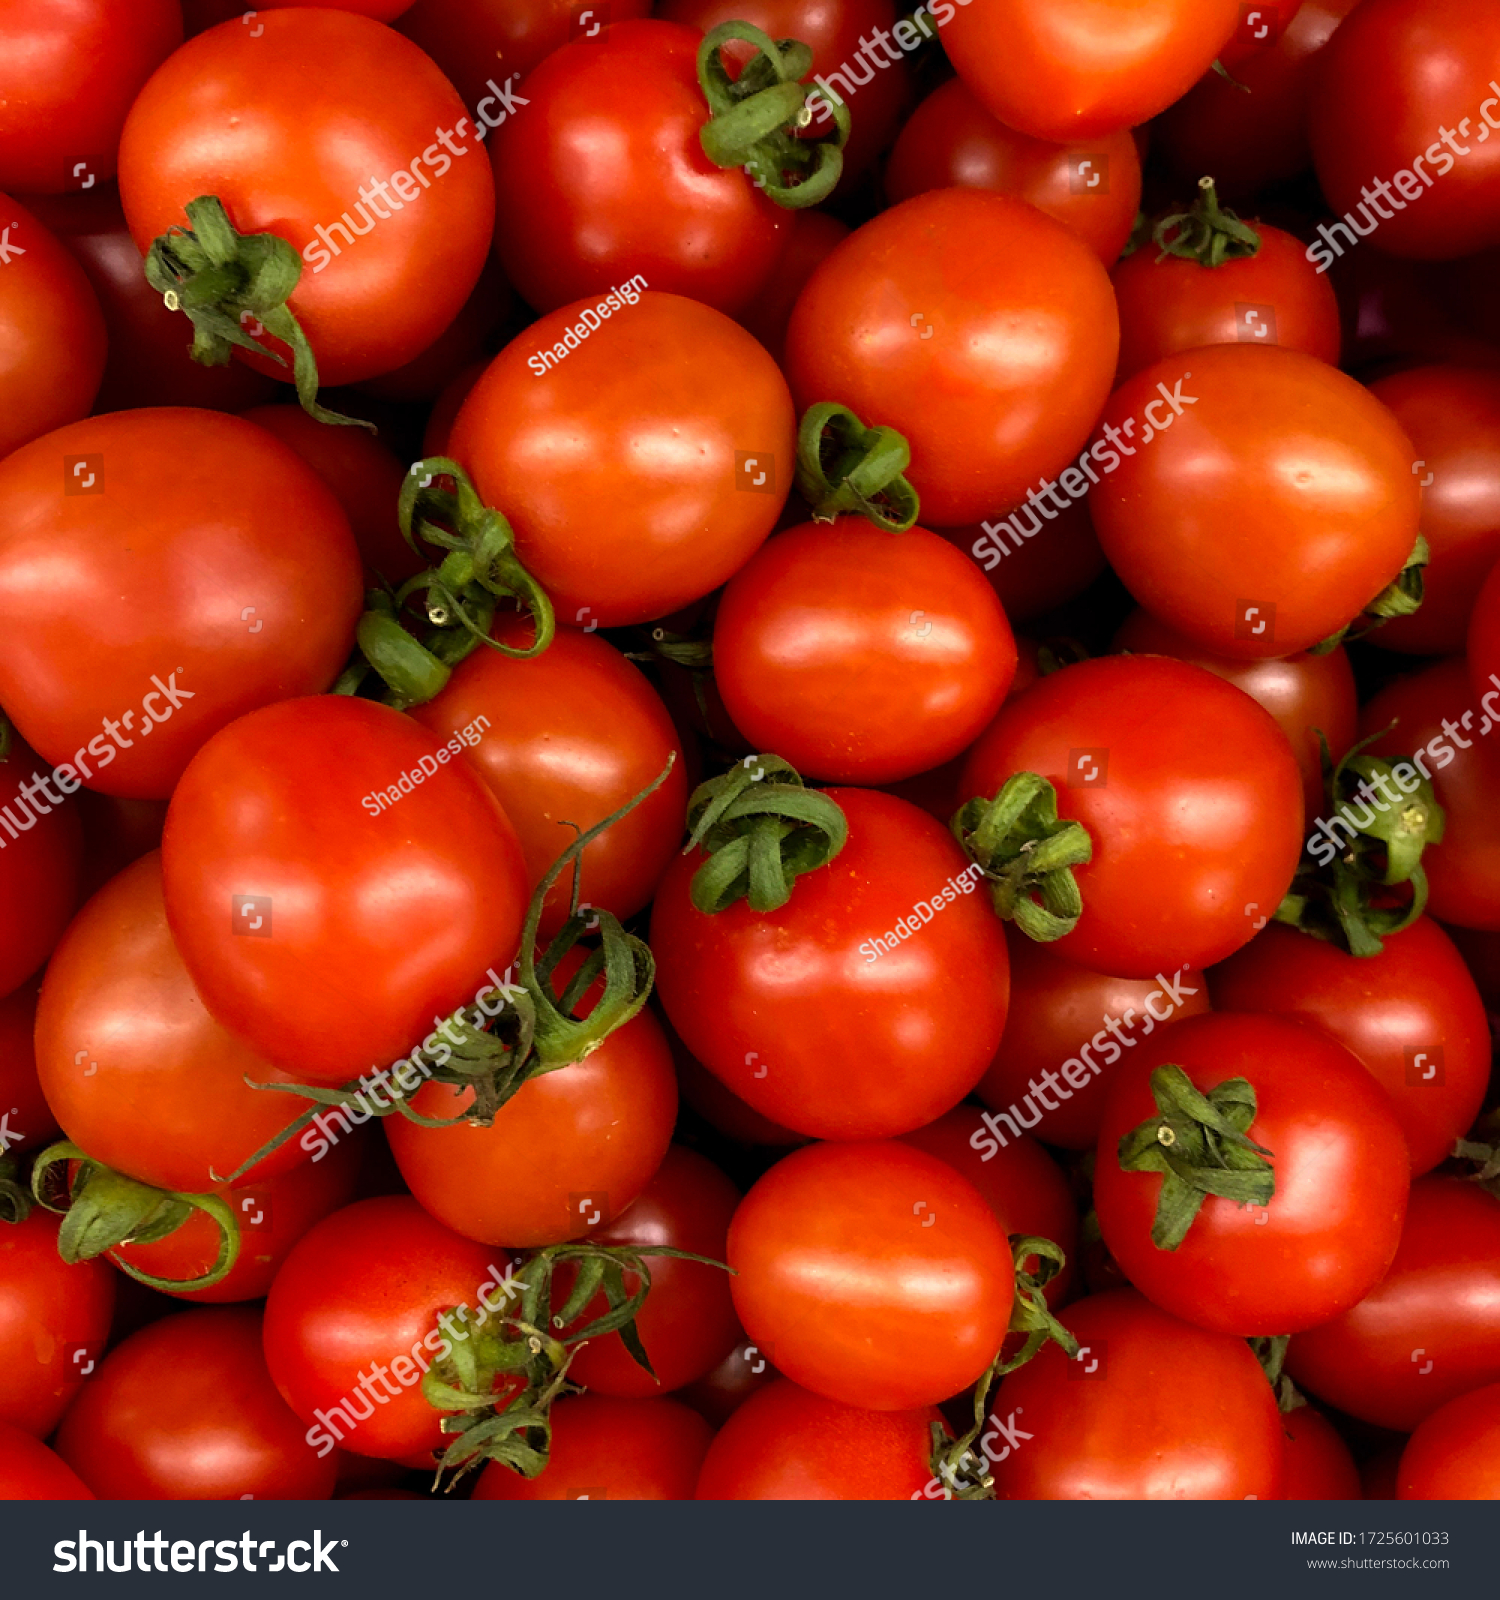 Macro photo of a vegetable red cherry tomato. Fruit vegetables tomato lies in rows. Stock photo  Background small tomatoes cherry  #1725601033